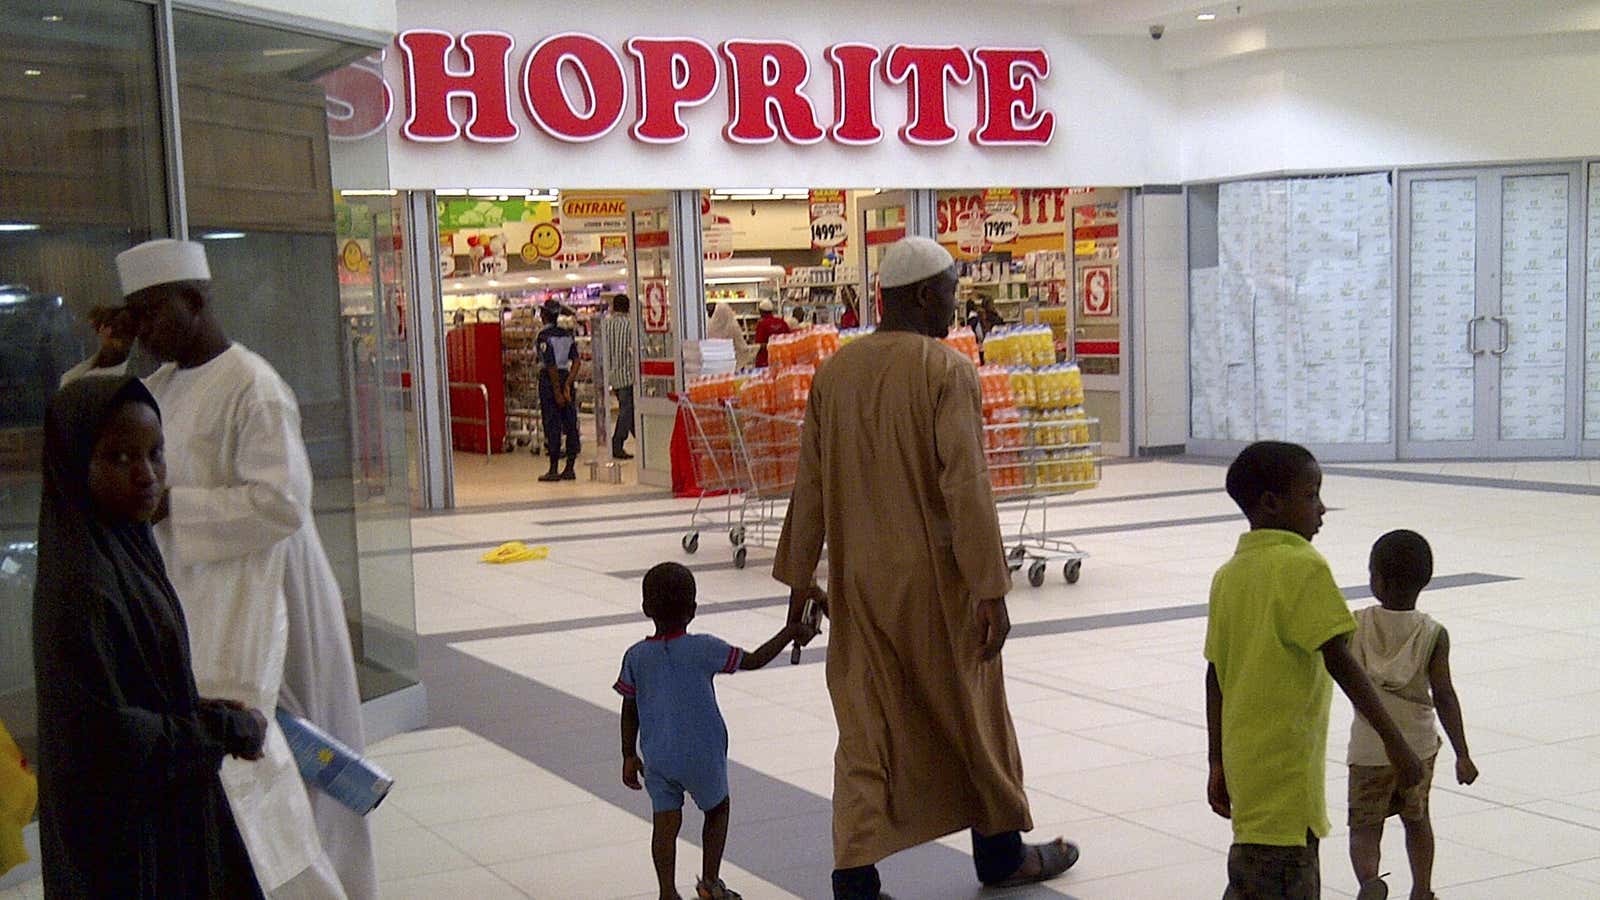 Shoprite is cementing its standing as Africa’s retail giant.